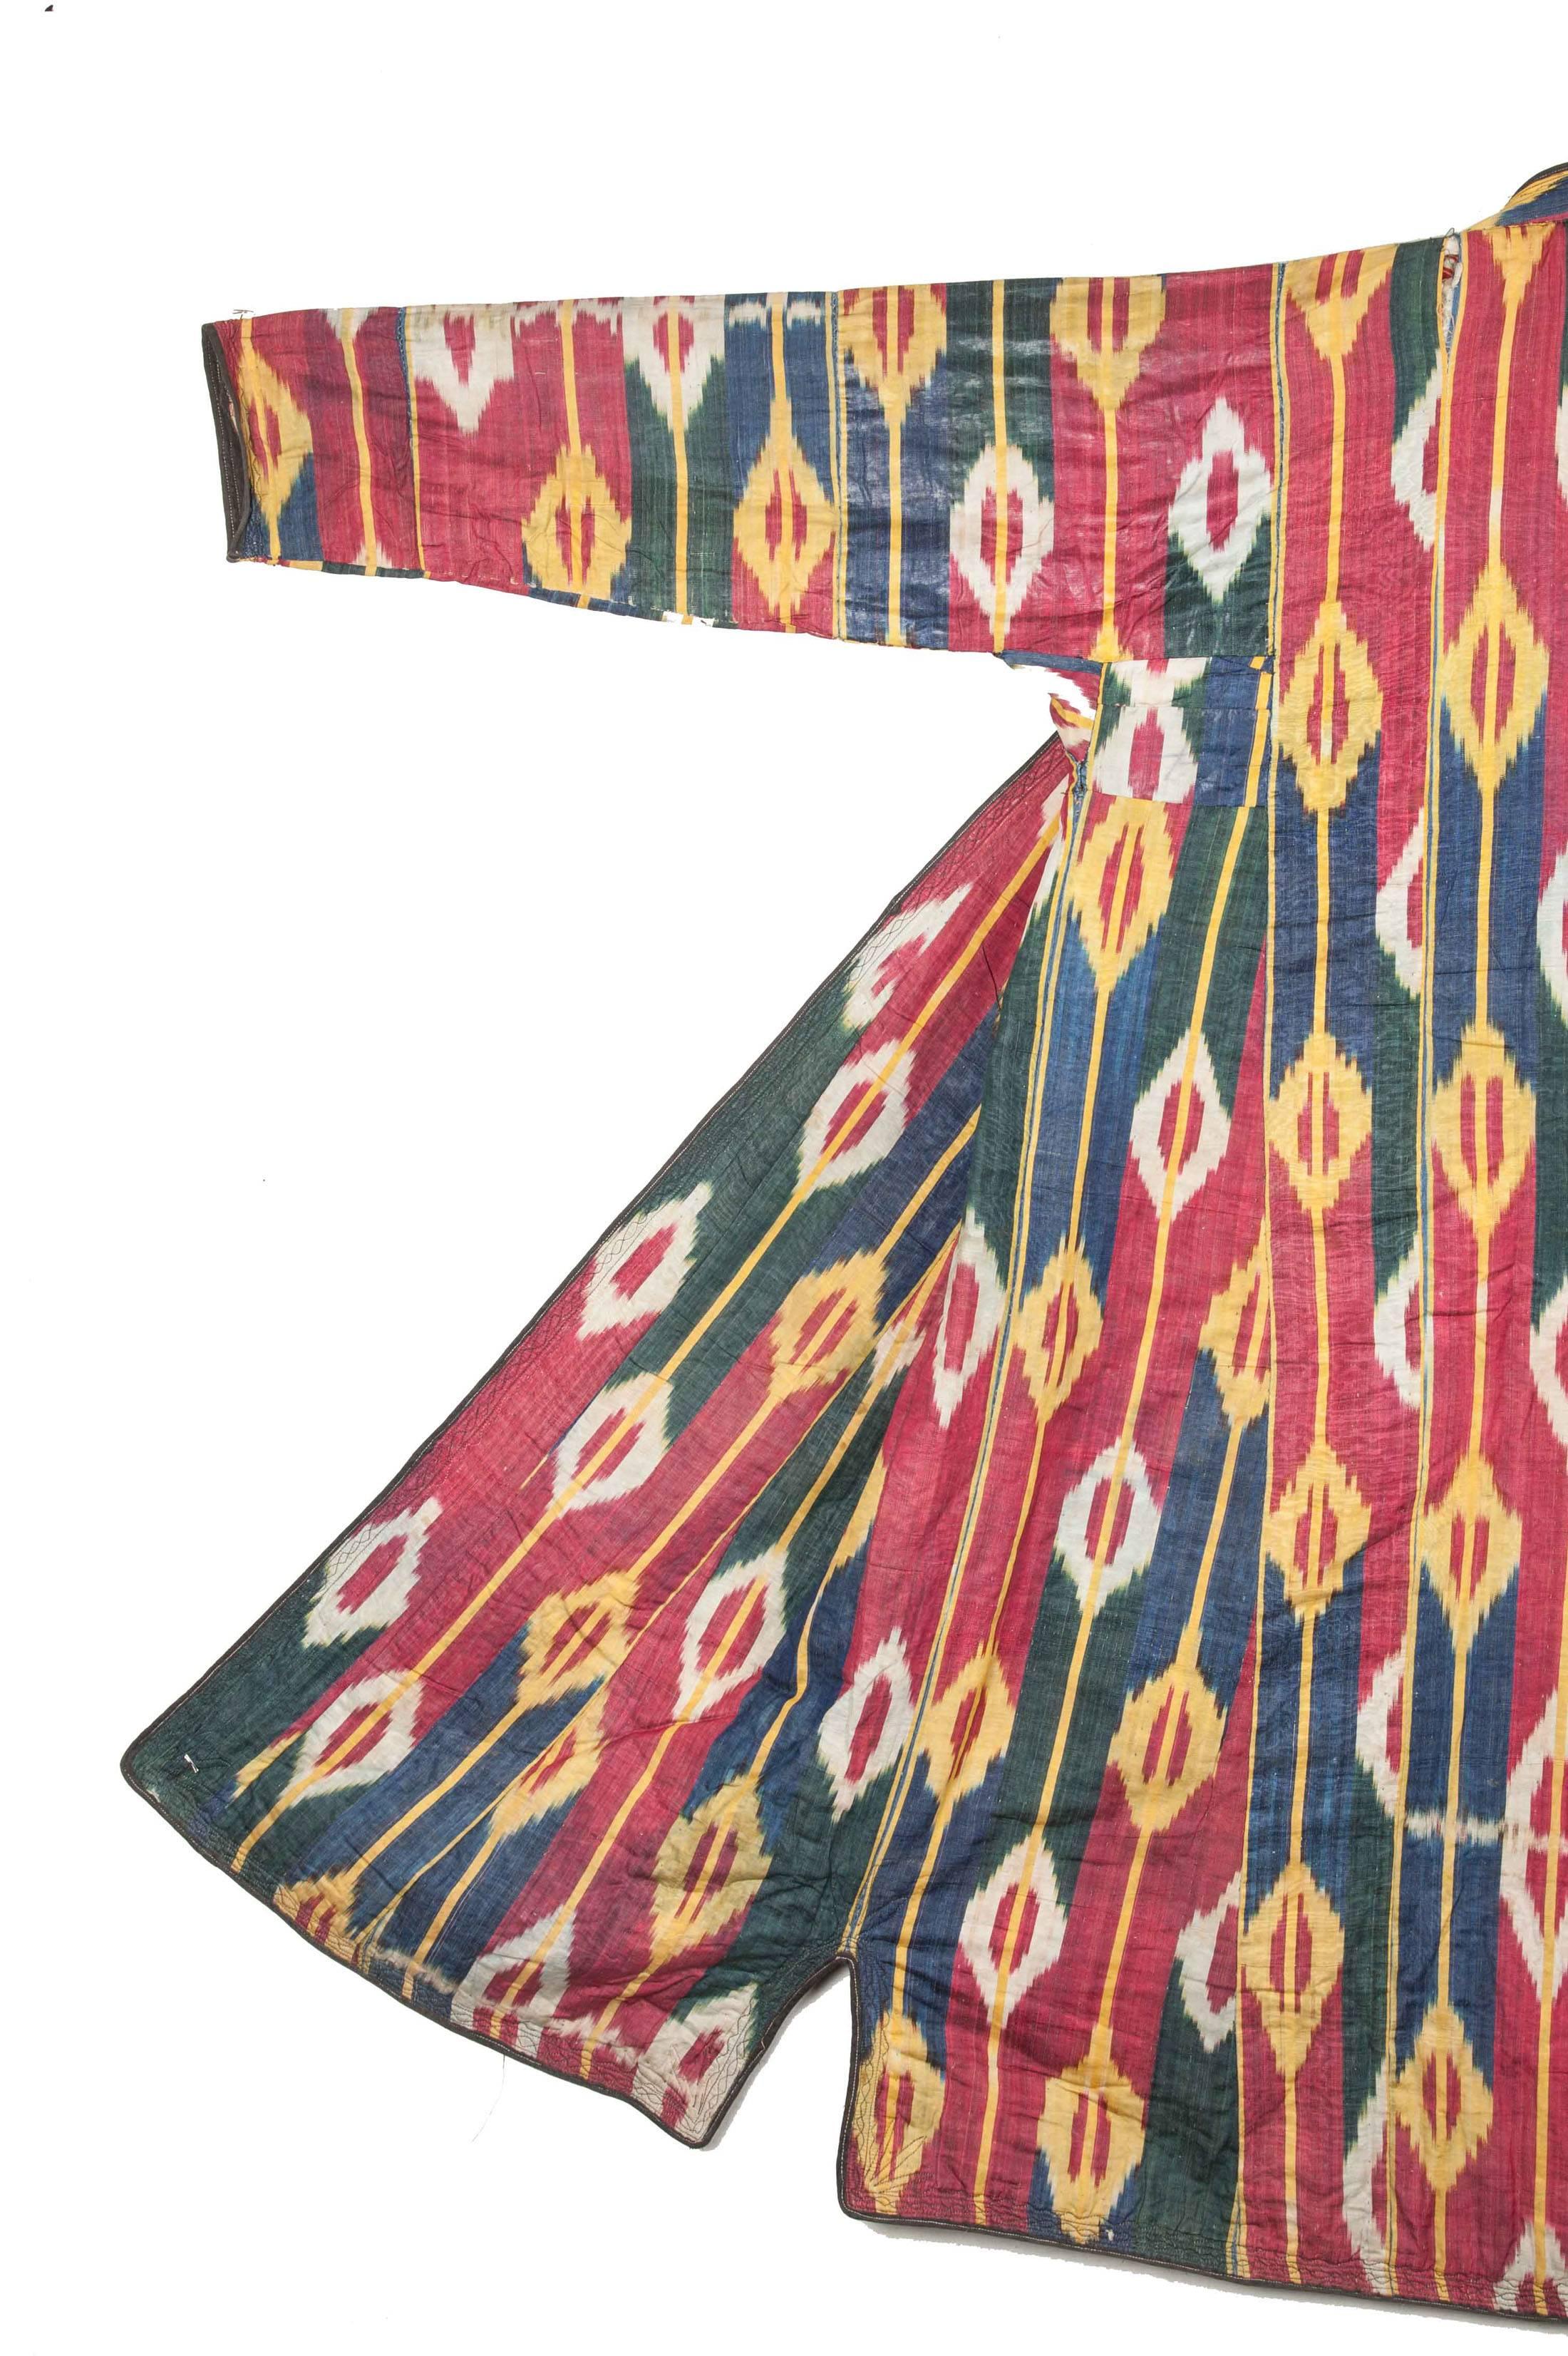 An unusual design for the Ikat design pool, in fairly good condition, the coat has a Russian cotton print as a lining and it is padded with cotton for winter use.
Sleeve to sleeve: 160 cm / 62.9